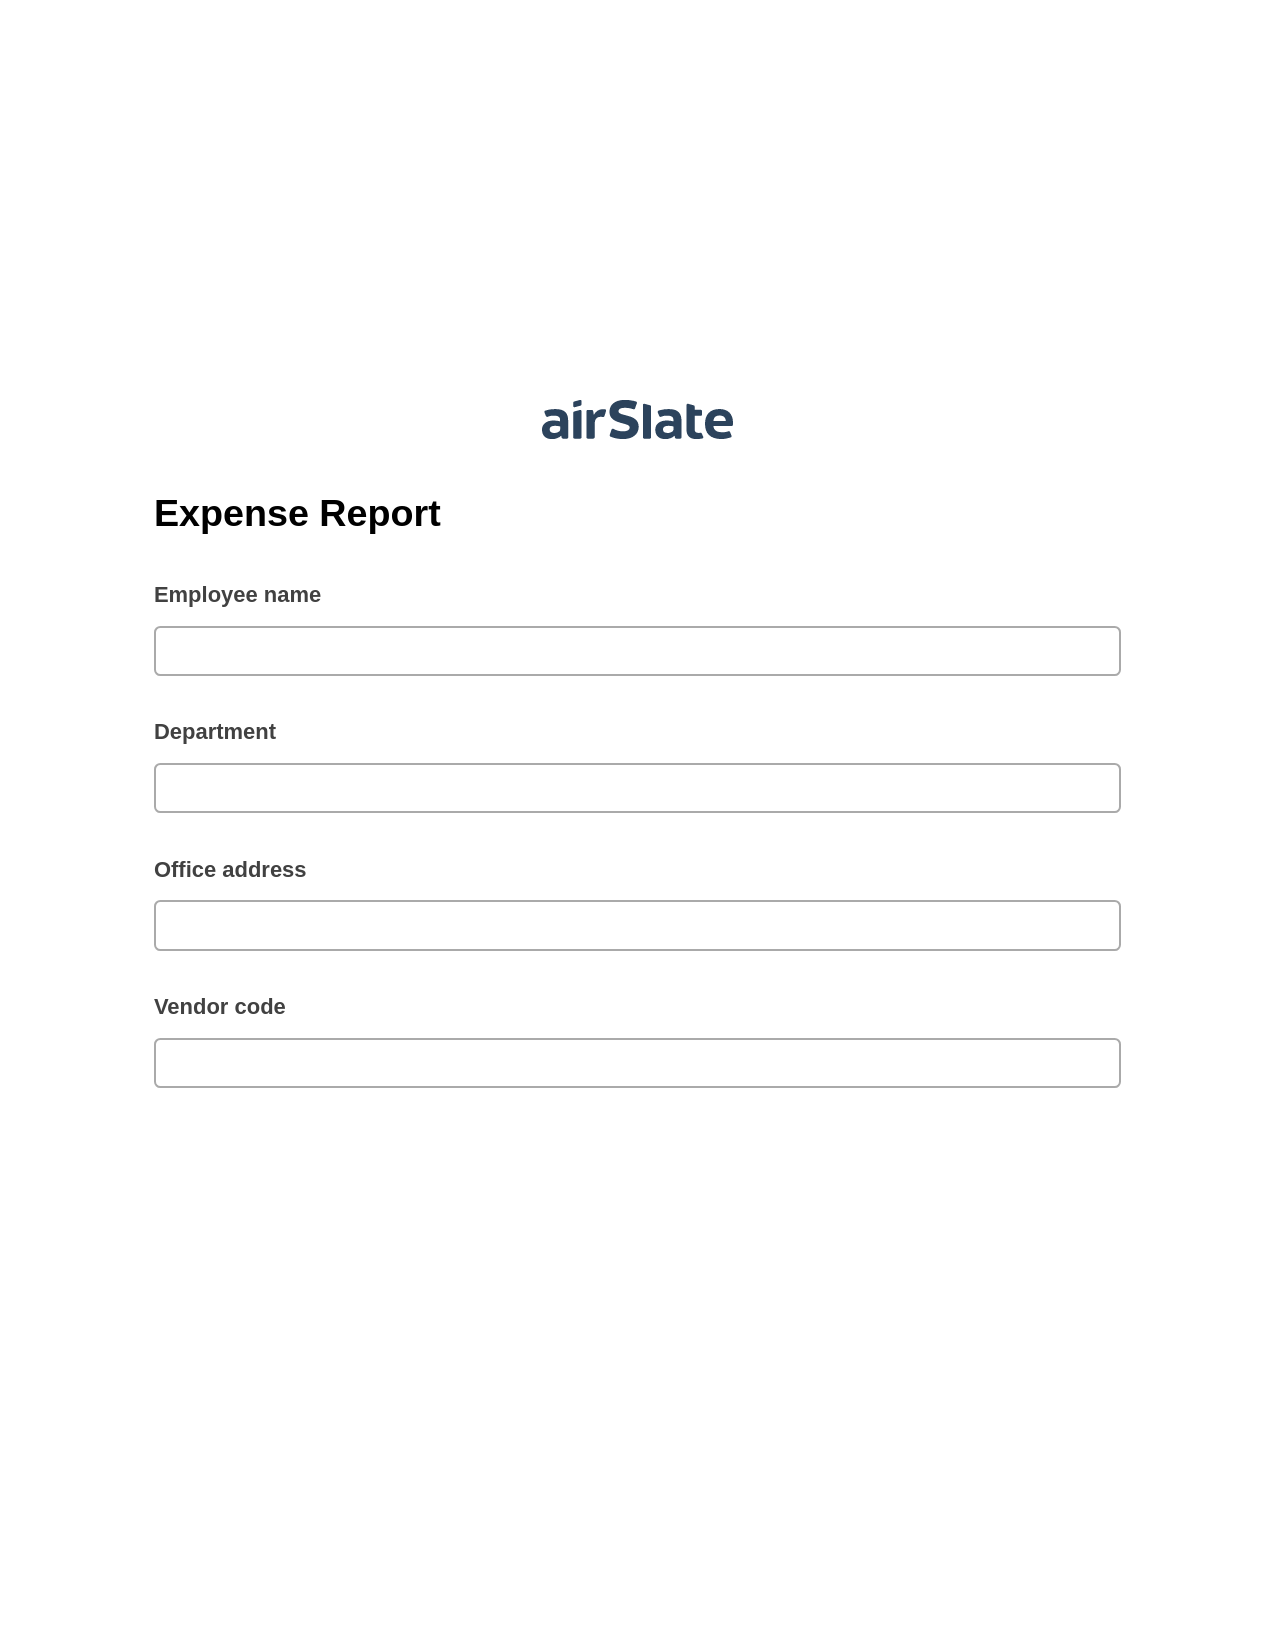 Expense Report Pre-fill Dropdowns from Excel Bot, Hide Signatures Bot, Export to Formstack Documents Bot